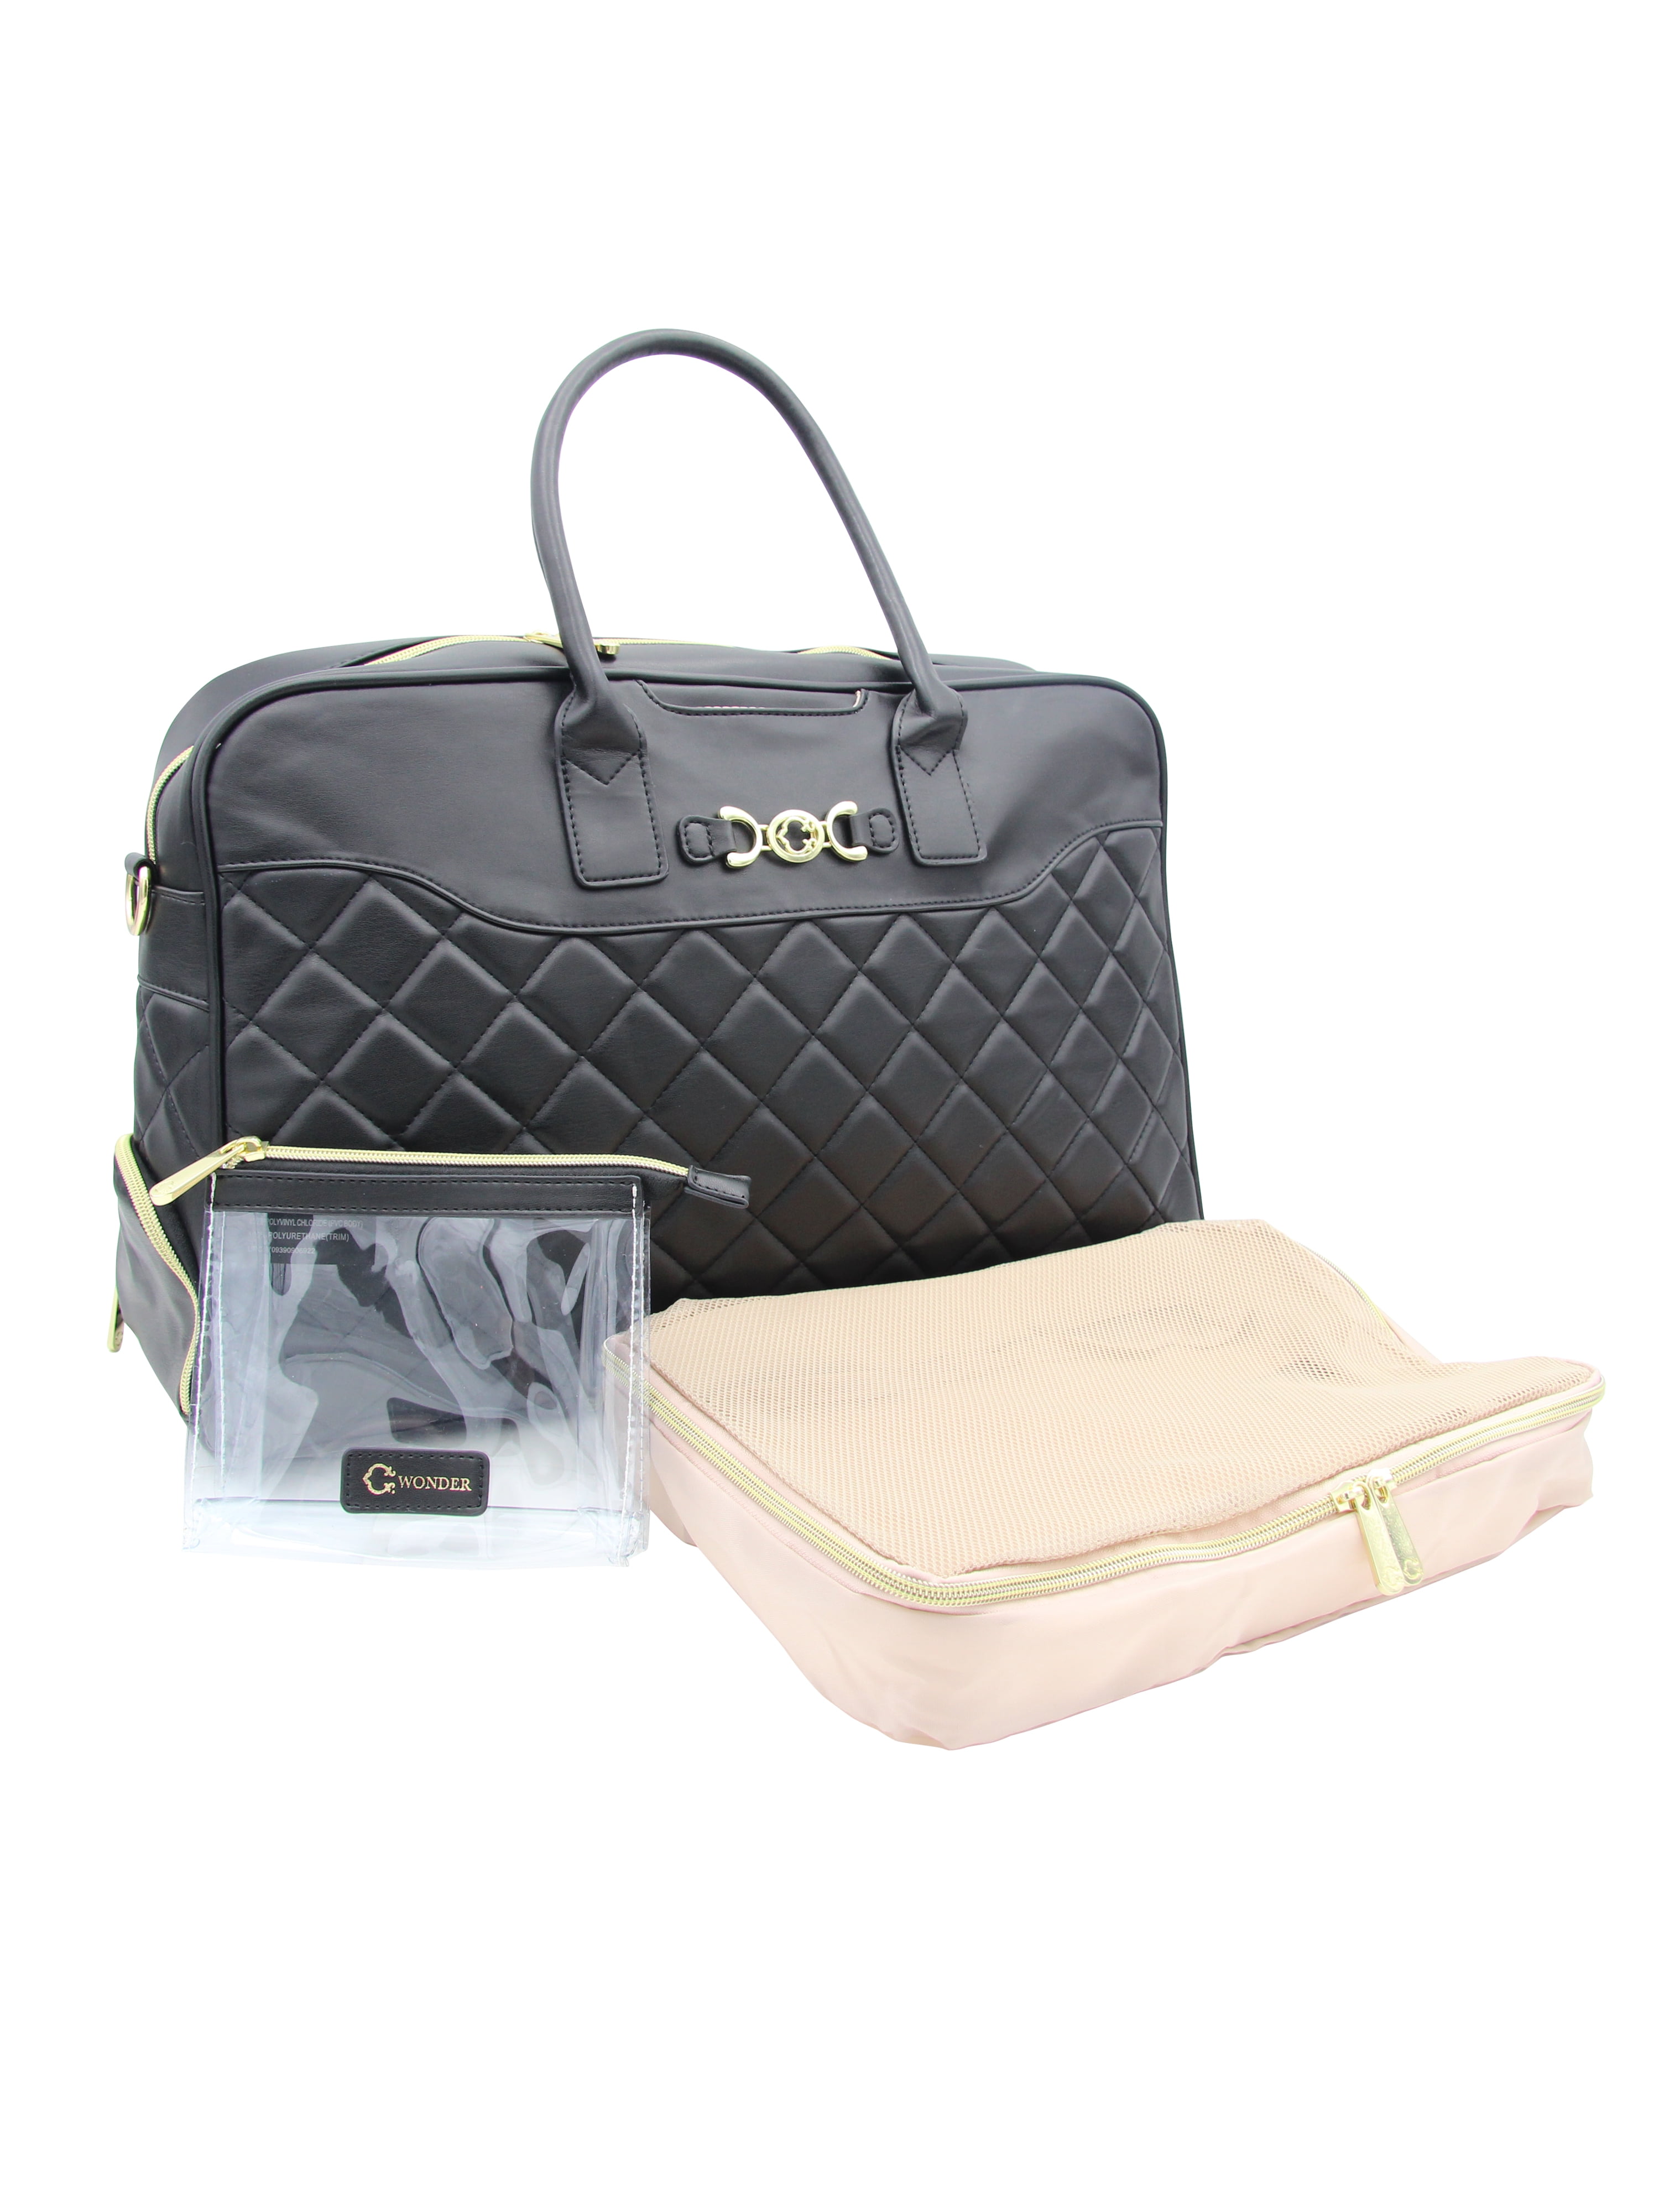 C. Wonder C.Wonder Women's Quilted Travel Duffel Bundle; Duffel, Packing Cube and Toiletry Bag Black, Size: One Size